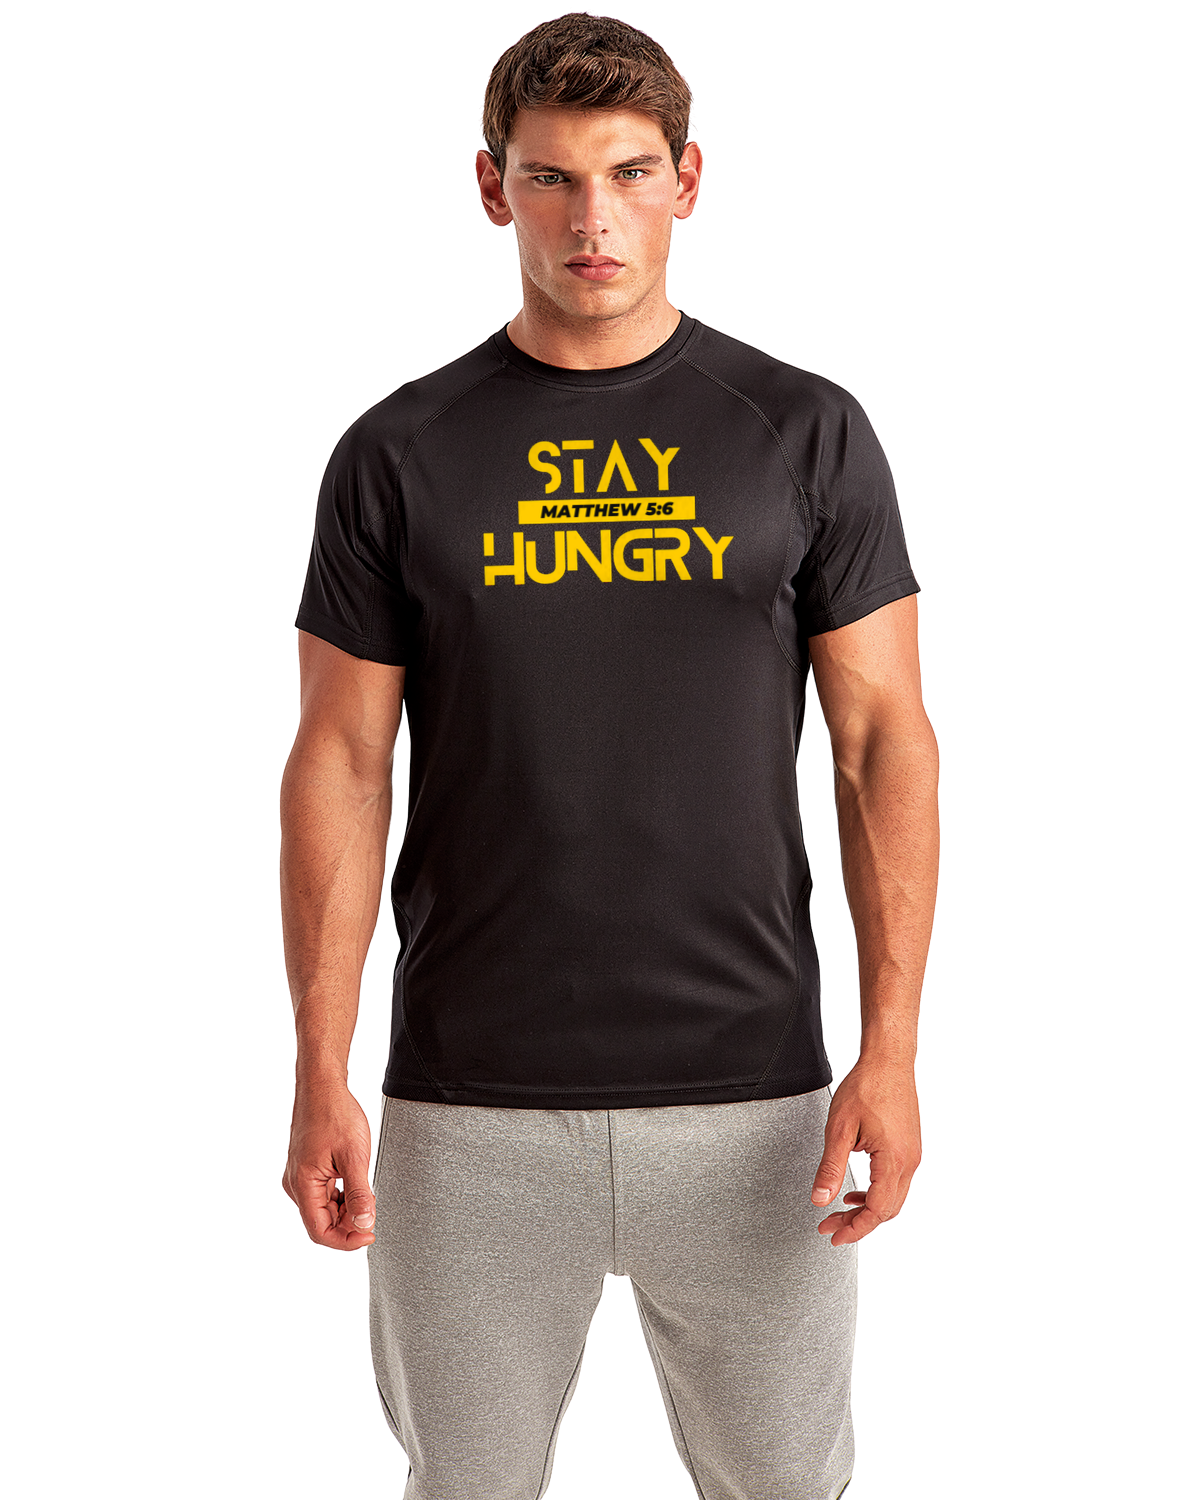 Stay Hungry Men's Dri-fit